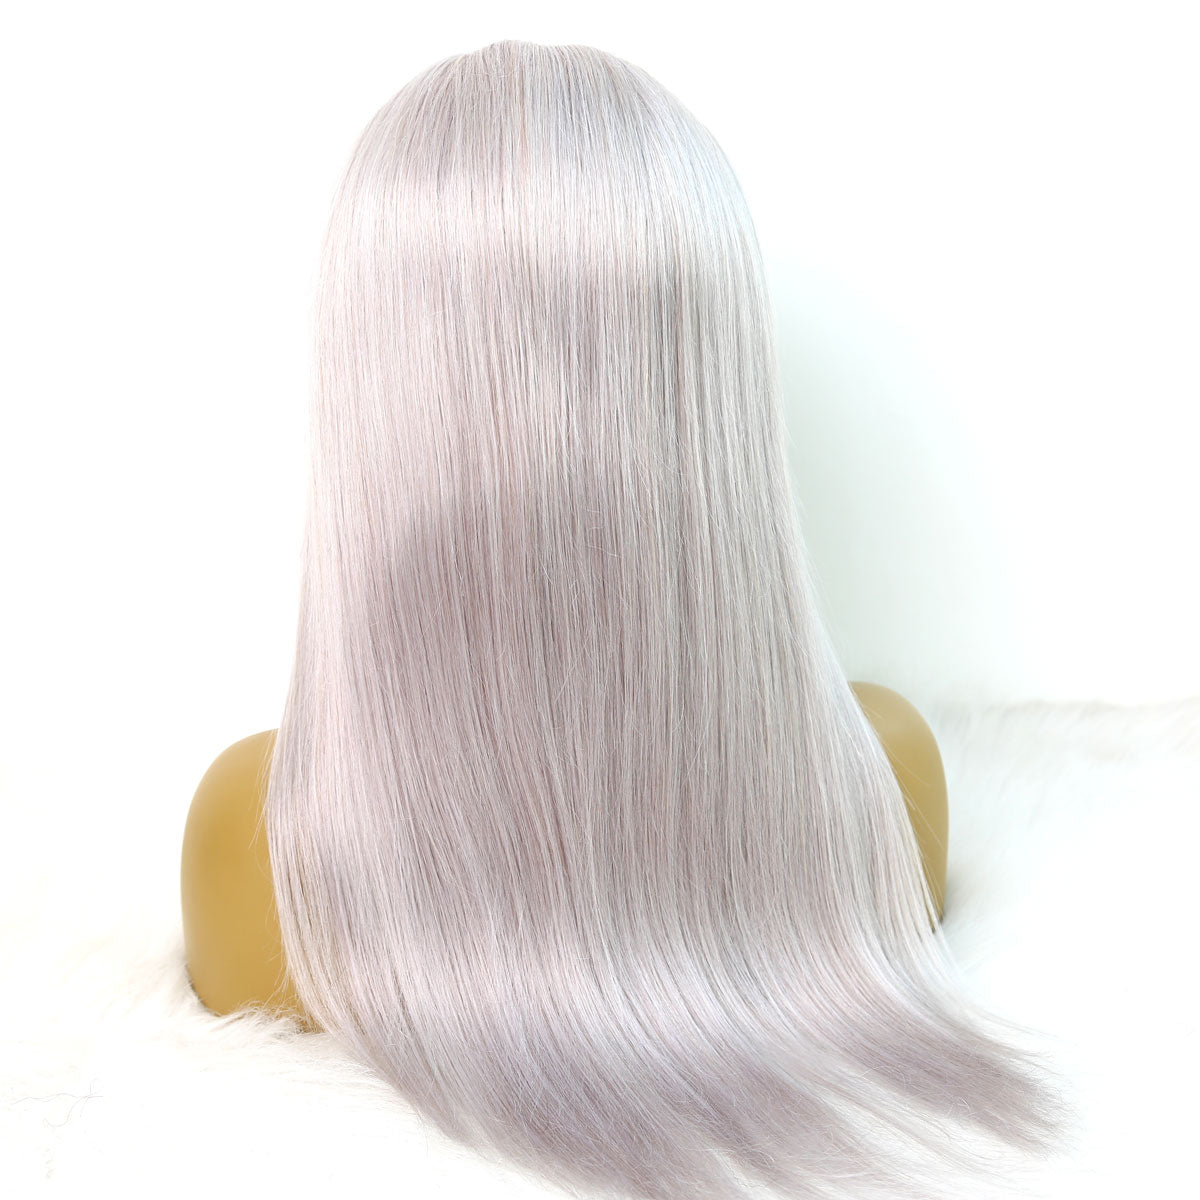 Long gray human hair wig on mannequin